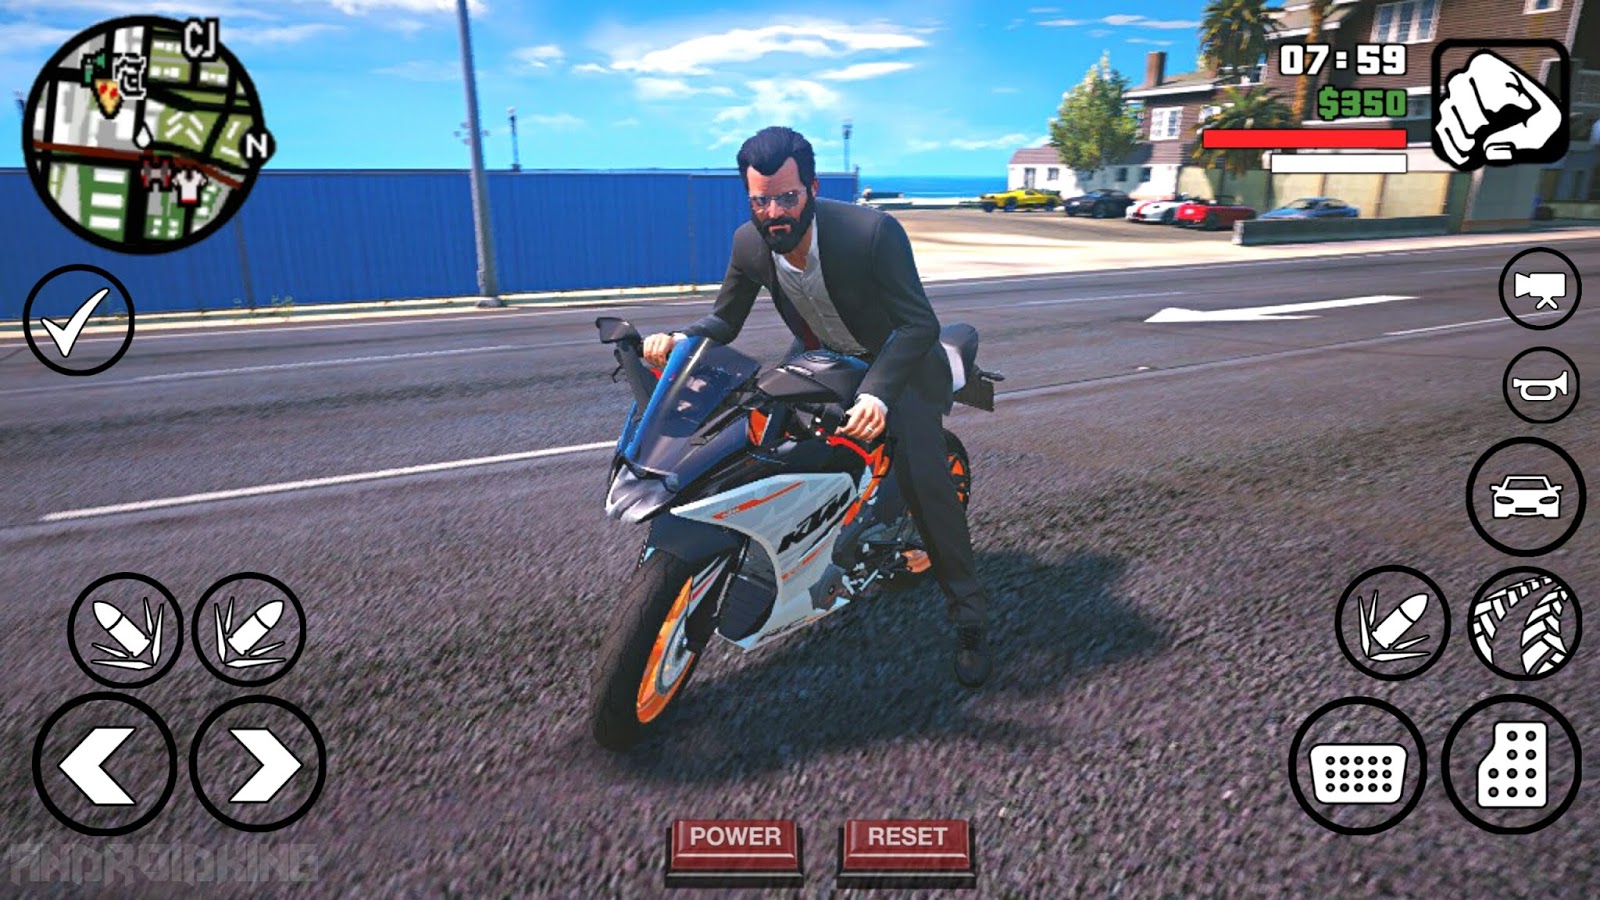 Gta 5 for android full apk фото 85